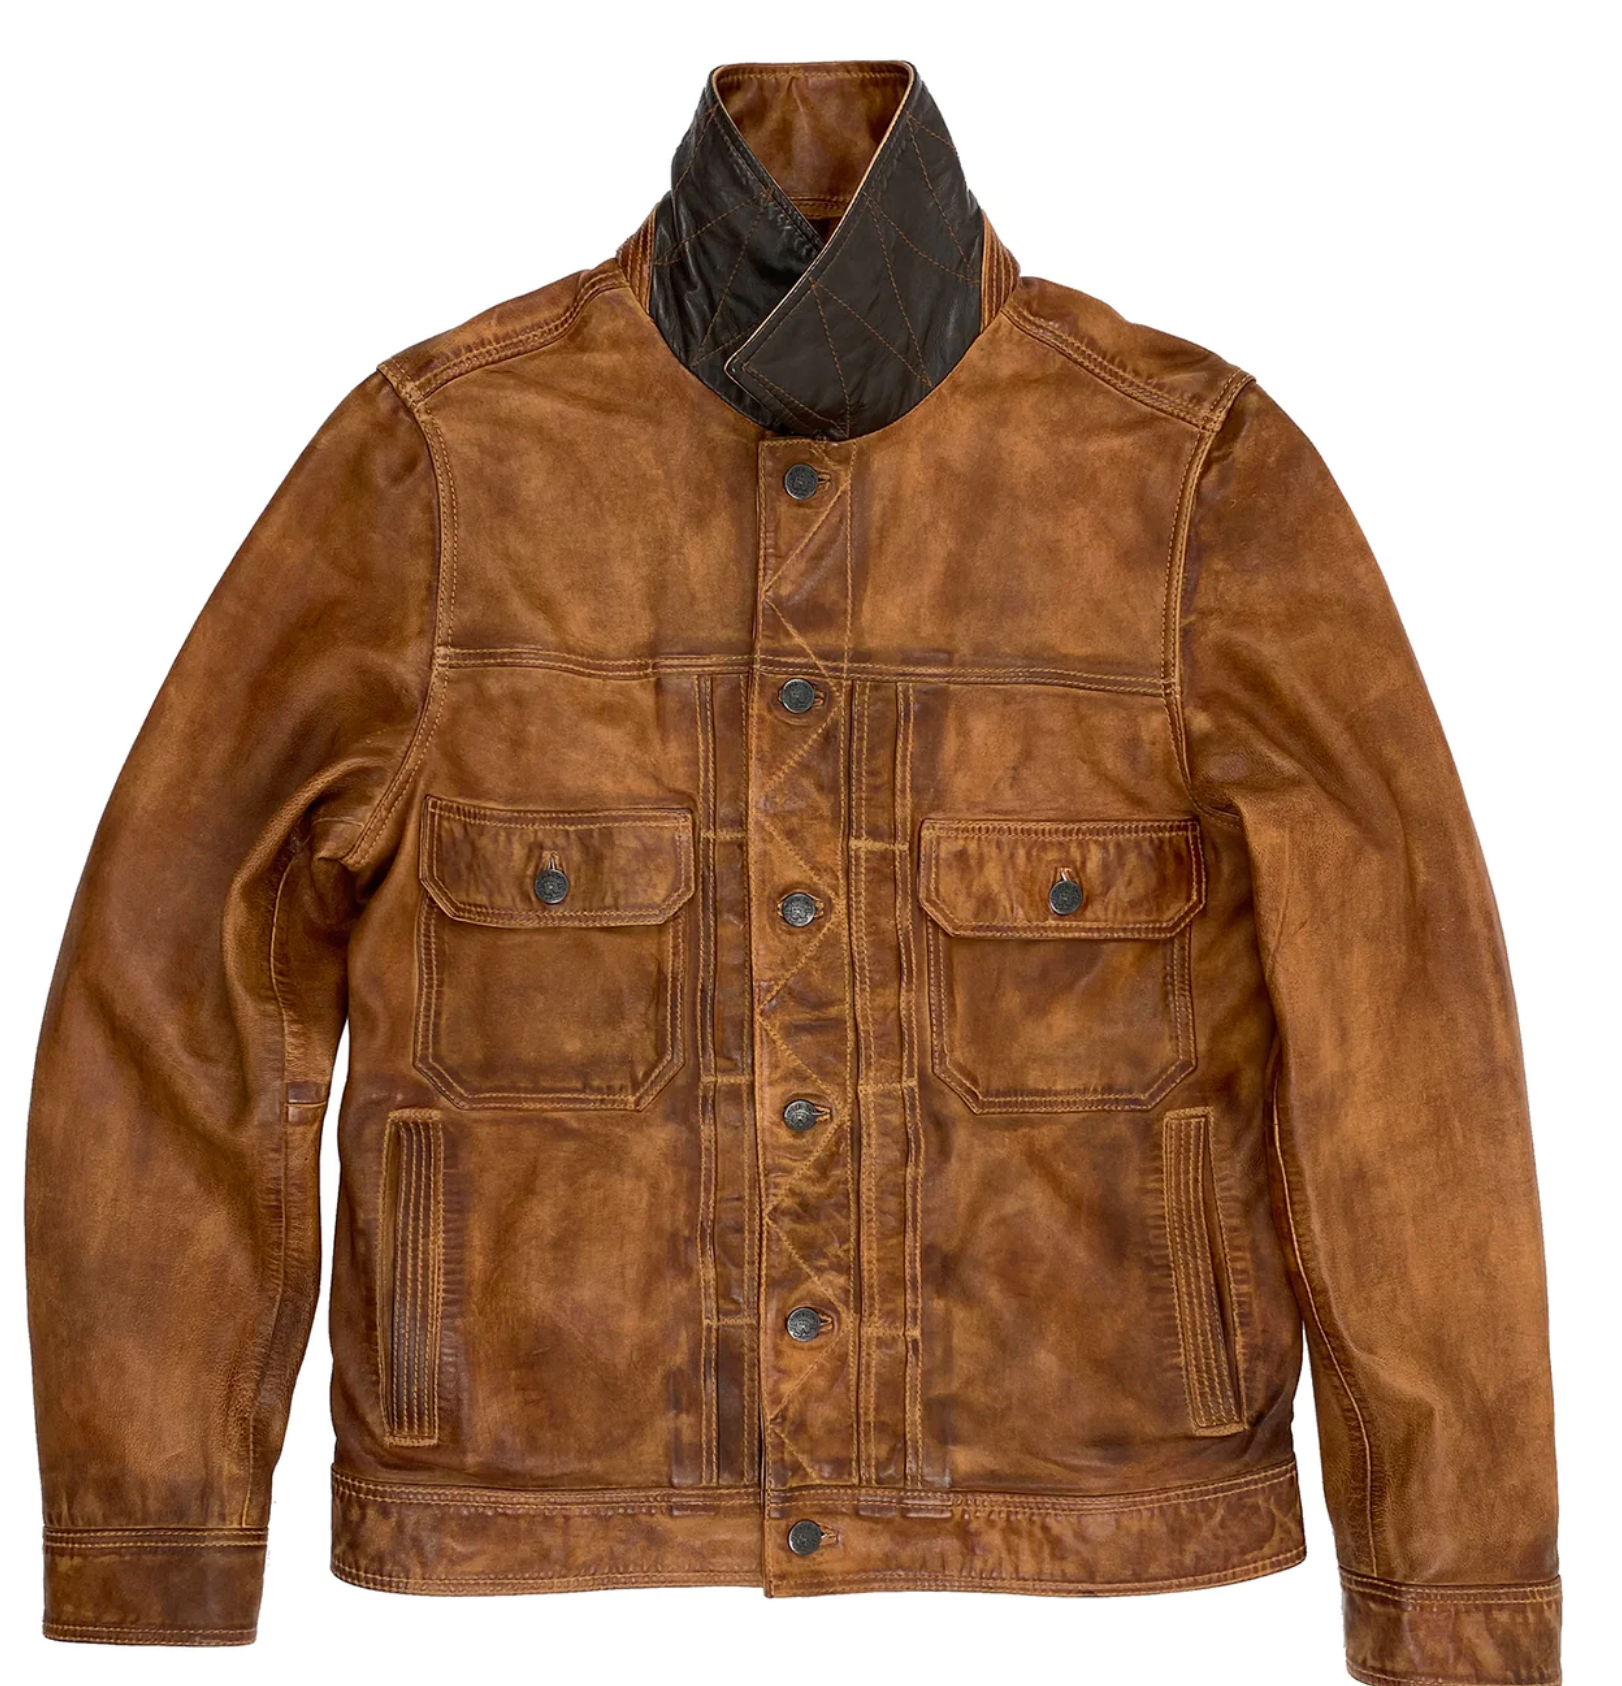 The Winslow Leather Shirt